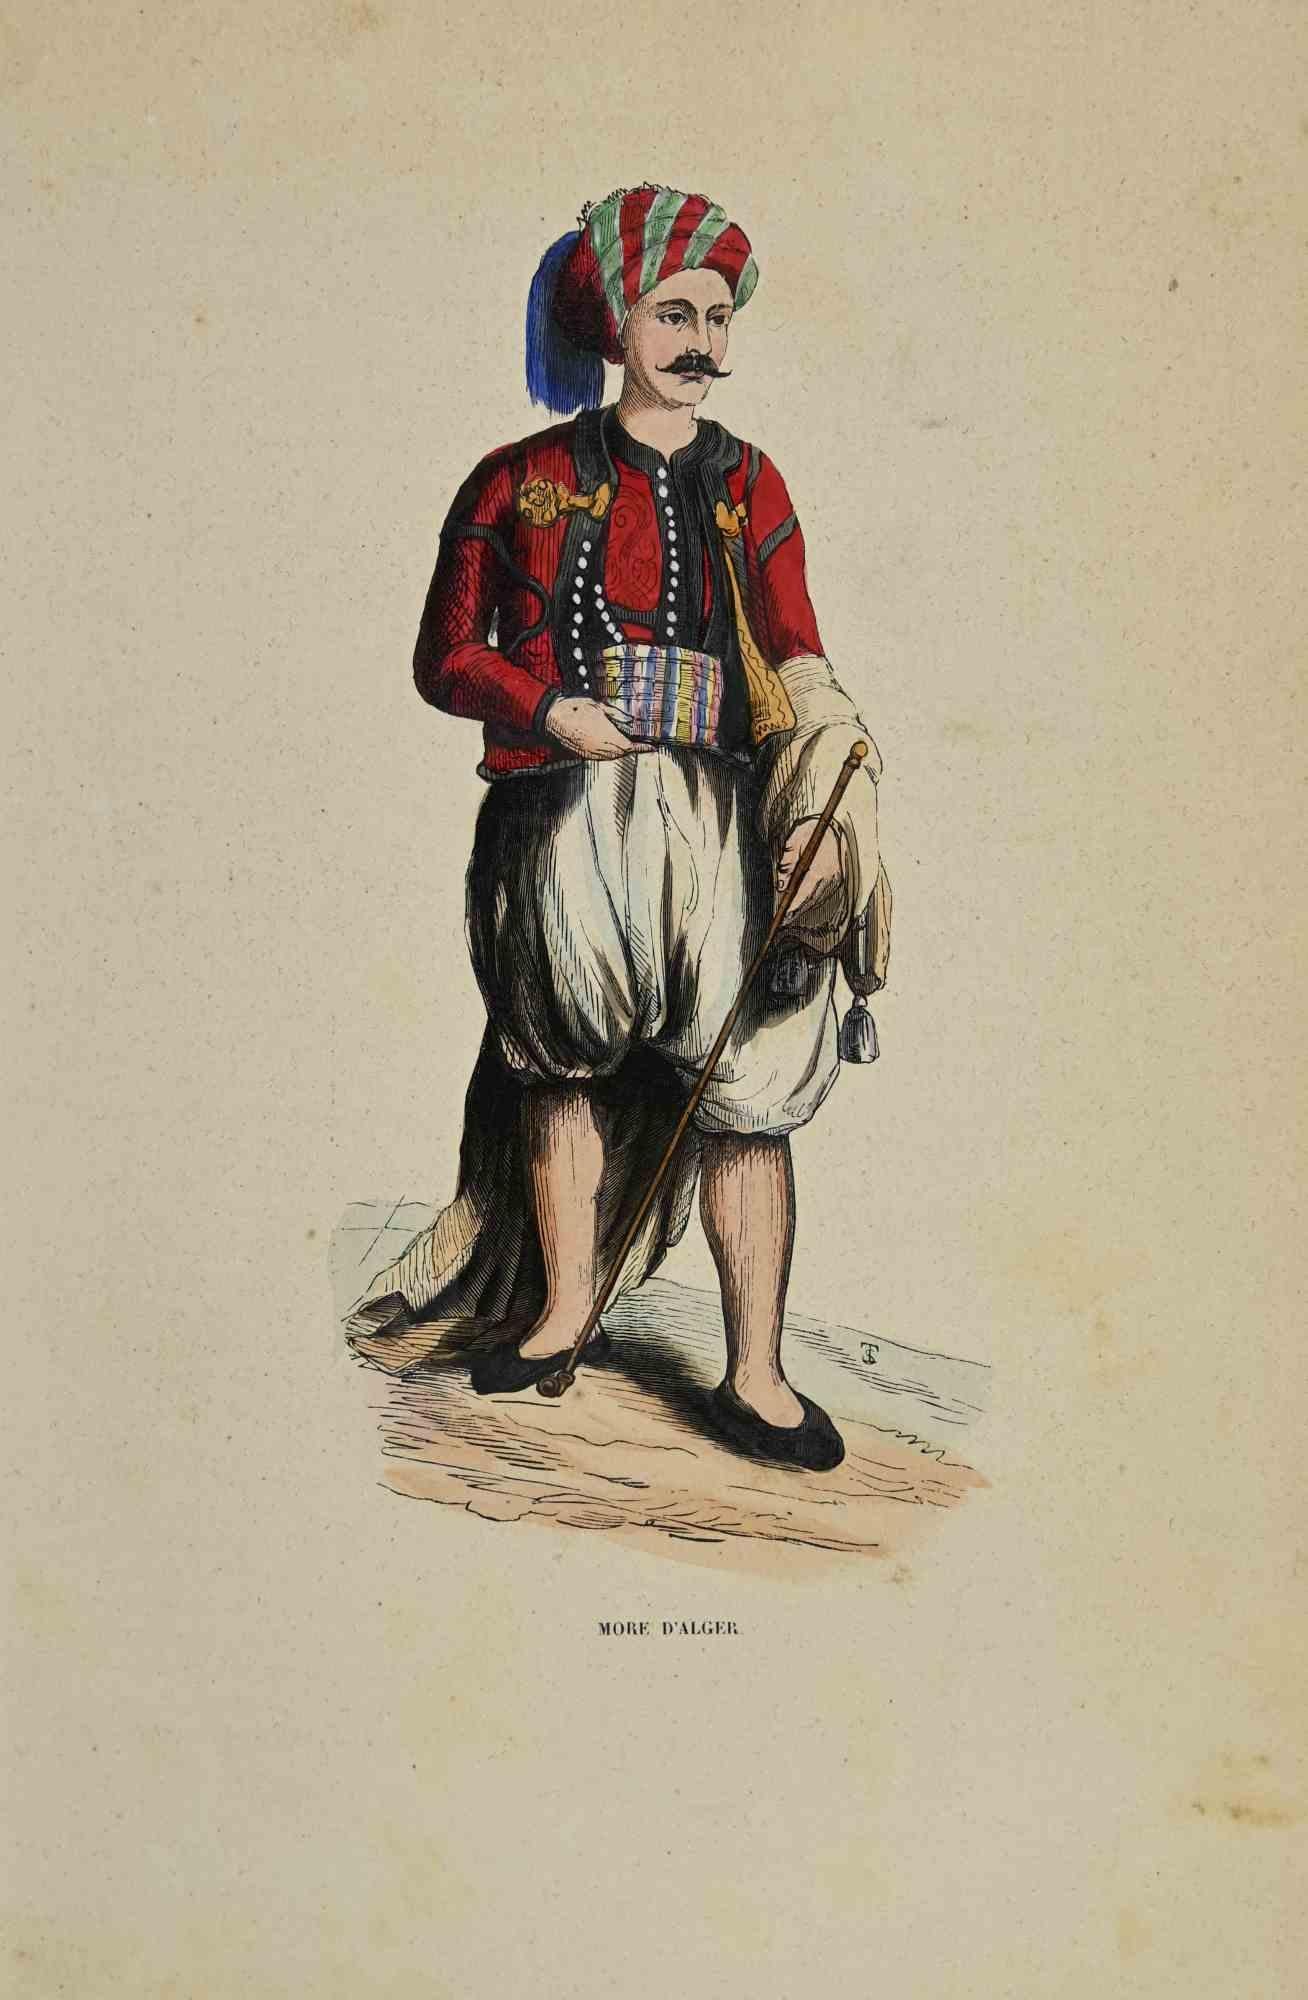 More d'Alger - Lithograph by Auguste Wahlen - 1844